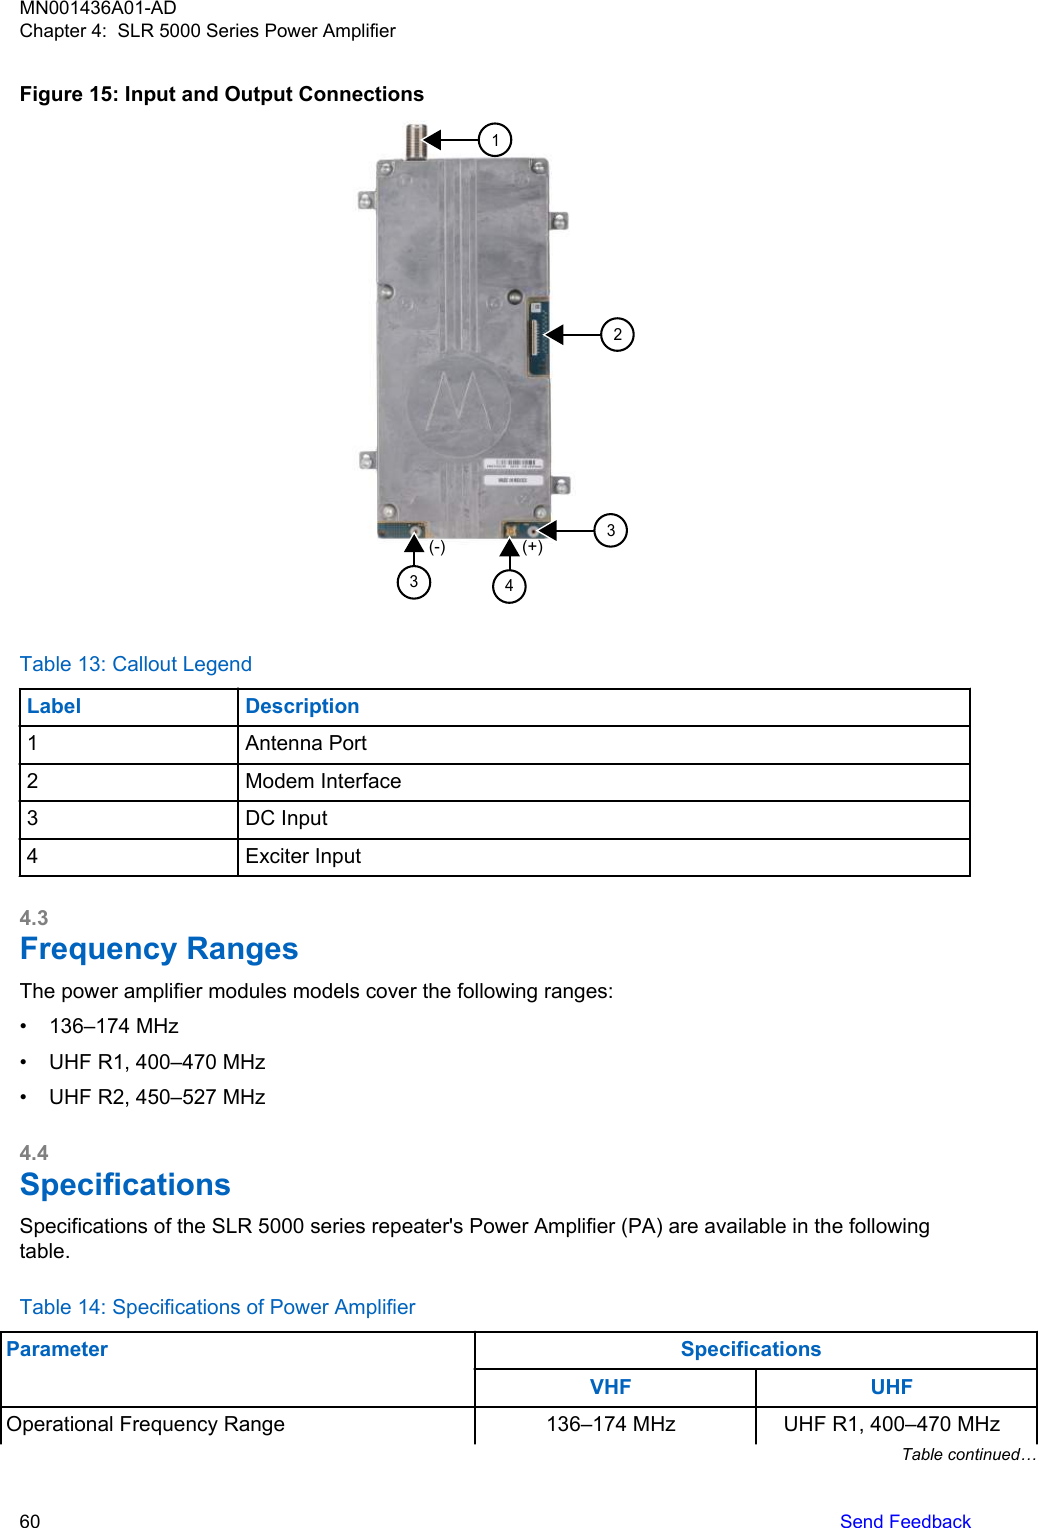 Figure 15: Input and Output Connections(+)(-)12433Table 13: Callout LegendLabel Description1 Antenna Port2 Modem Interface3 DC Input4 Exciter Input4.3Frequency RangesThe power amplifier modules models cover the following ranges:• 136–174 MHz• UHF R1, 400–470 MHz• UHF R2, 450–527 MHz4.4SpecificationsSpecifications of the SLR 5000 series repeater&apos;s Power Amplifier (PA) are available in the followingtable.Table 14: Specifications of Power AmplifierParameter SpecificationsVHF UHFOperational Frequency Range 136–174 MHz UHF R1, 400–470 MHzTable continued…MN001436A01-ADChapter 4:  SLR 5000 Series Power Amplifier60   Send Feedback